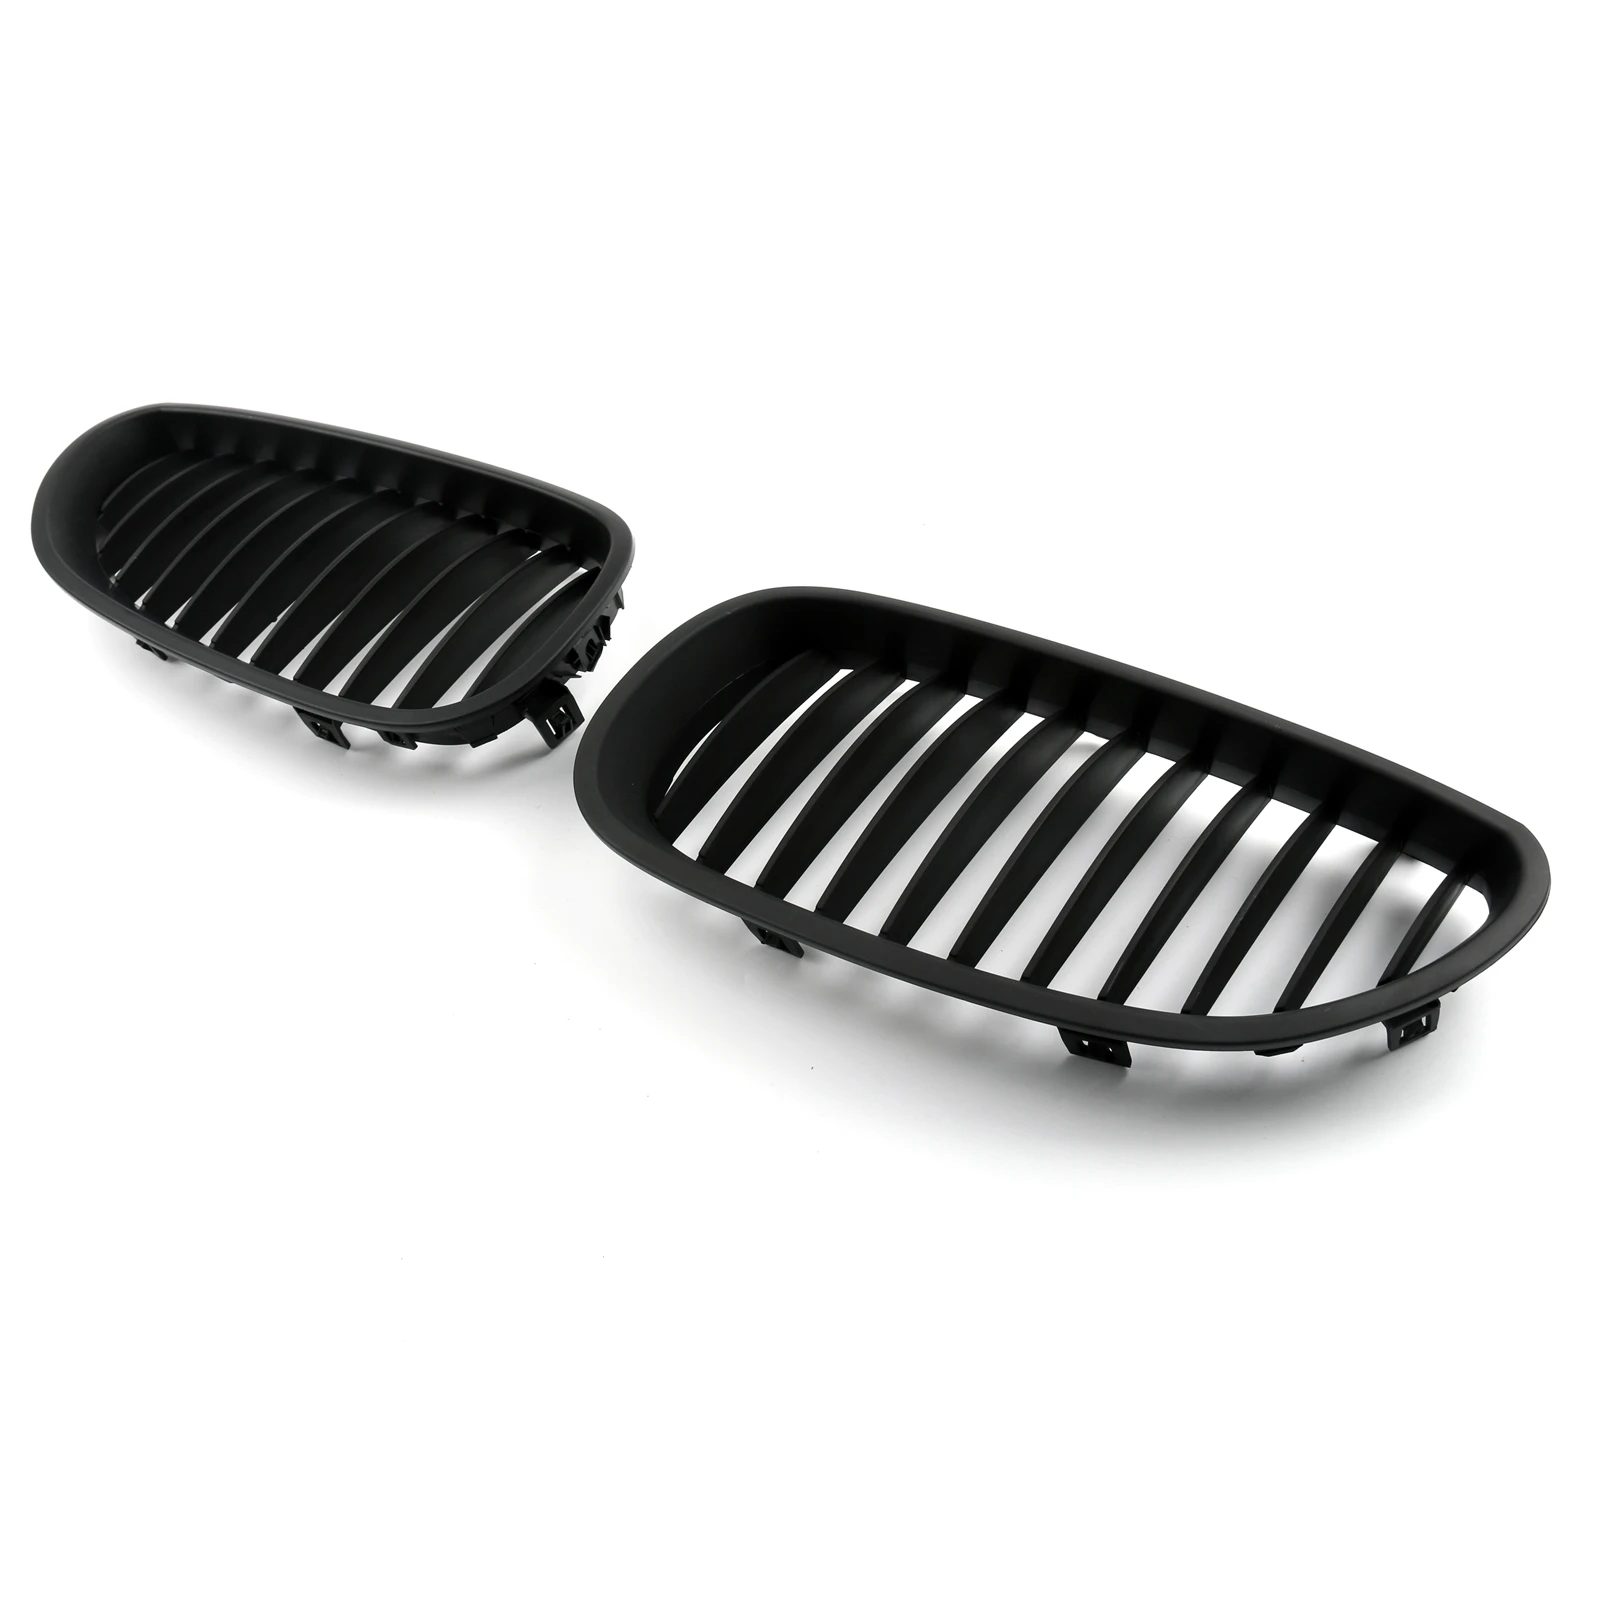 

Areyourshop Matt Black Front Grille/Front Kidney Grill For BMW E60 E61 5 Series 2003 2004 2005 2006 2007 2008 2009 2010